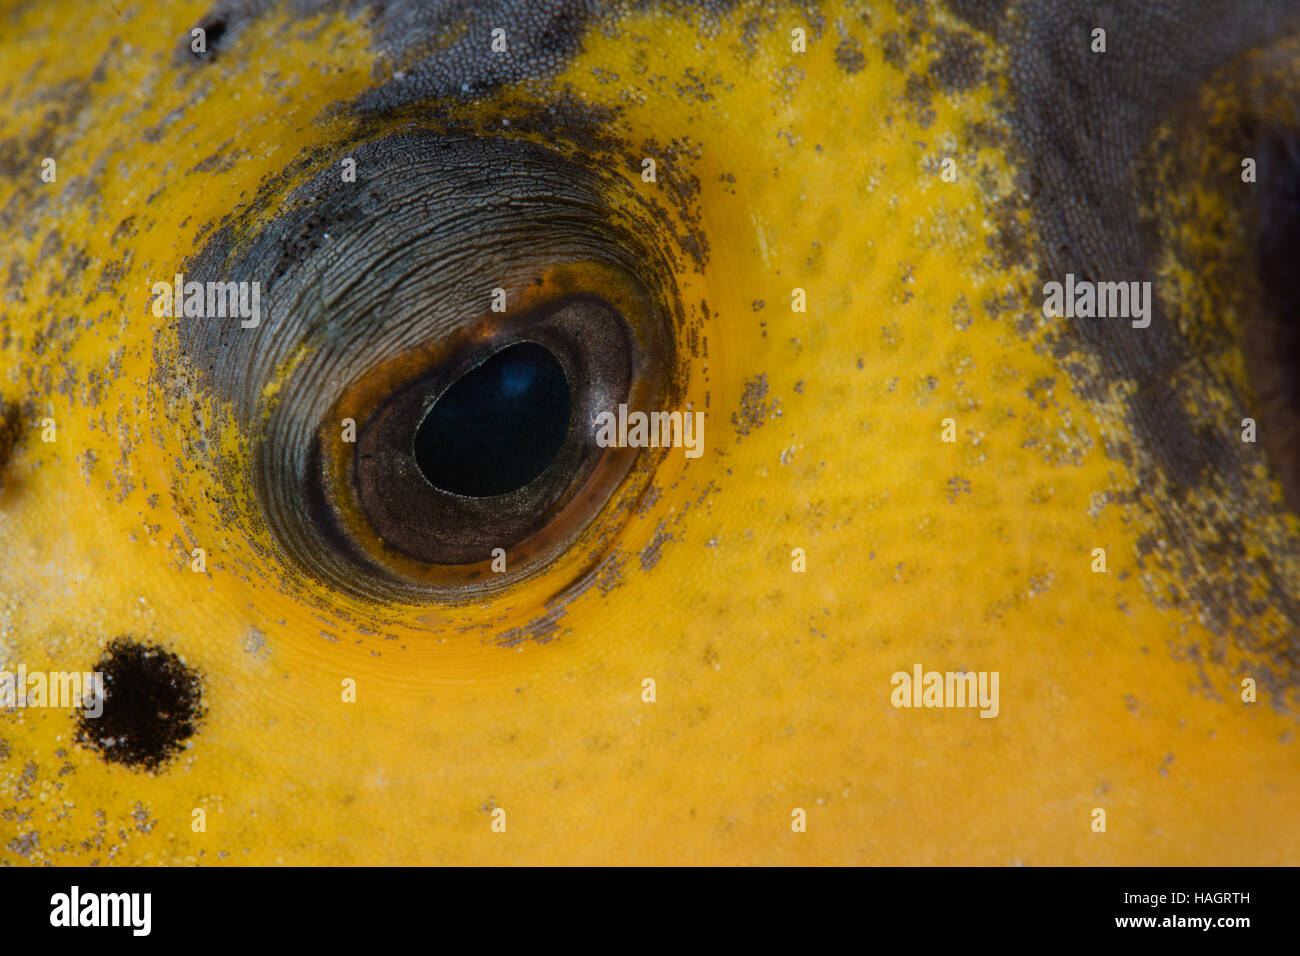 Detail of the eye of a Blackspotted pufferfish (Arothron nigropunctatus) on a coral reef in Komodo National Park, Indonesia. Stock Photo